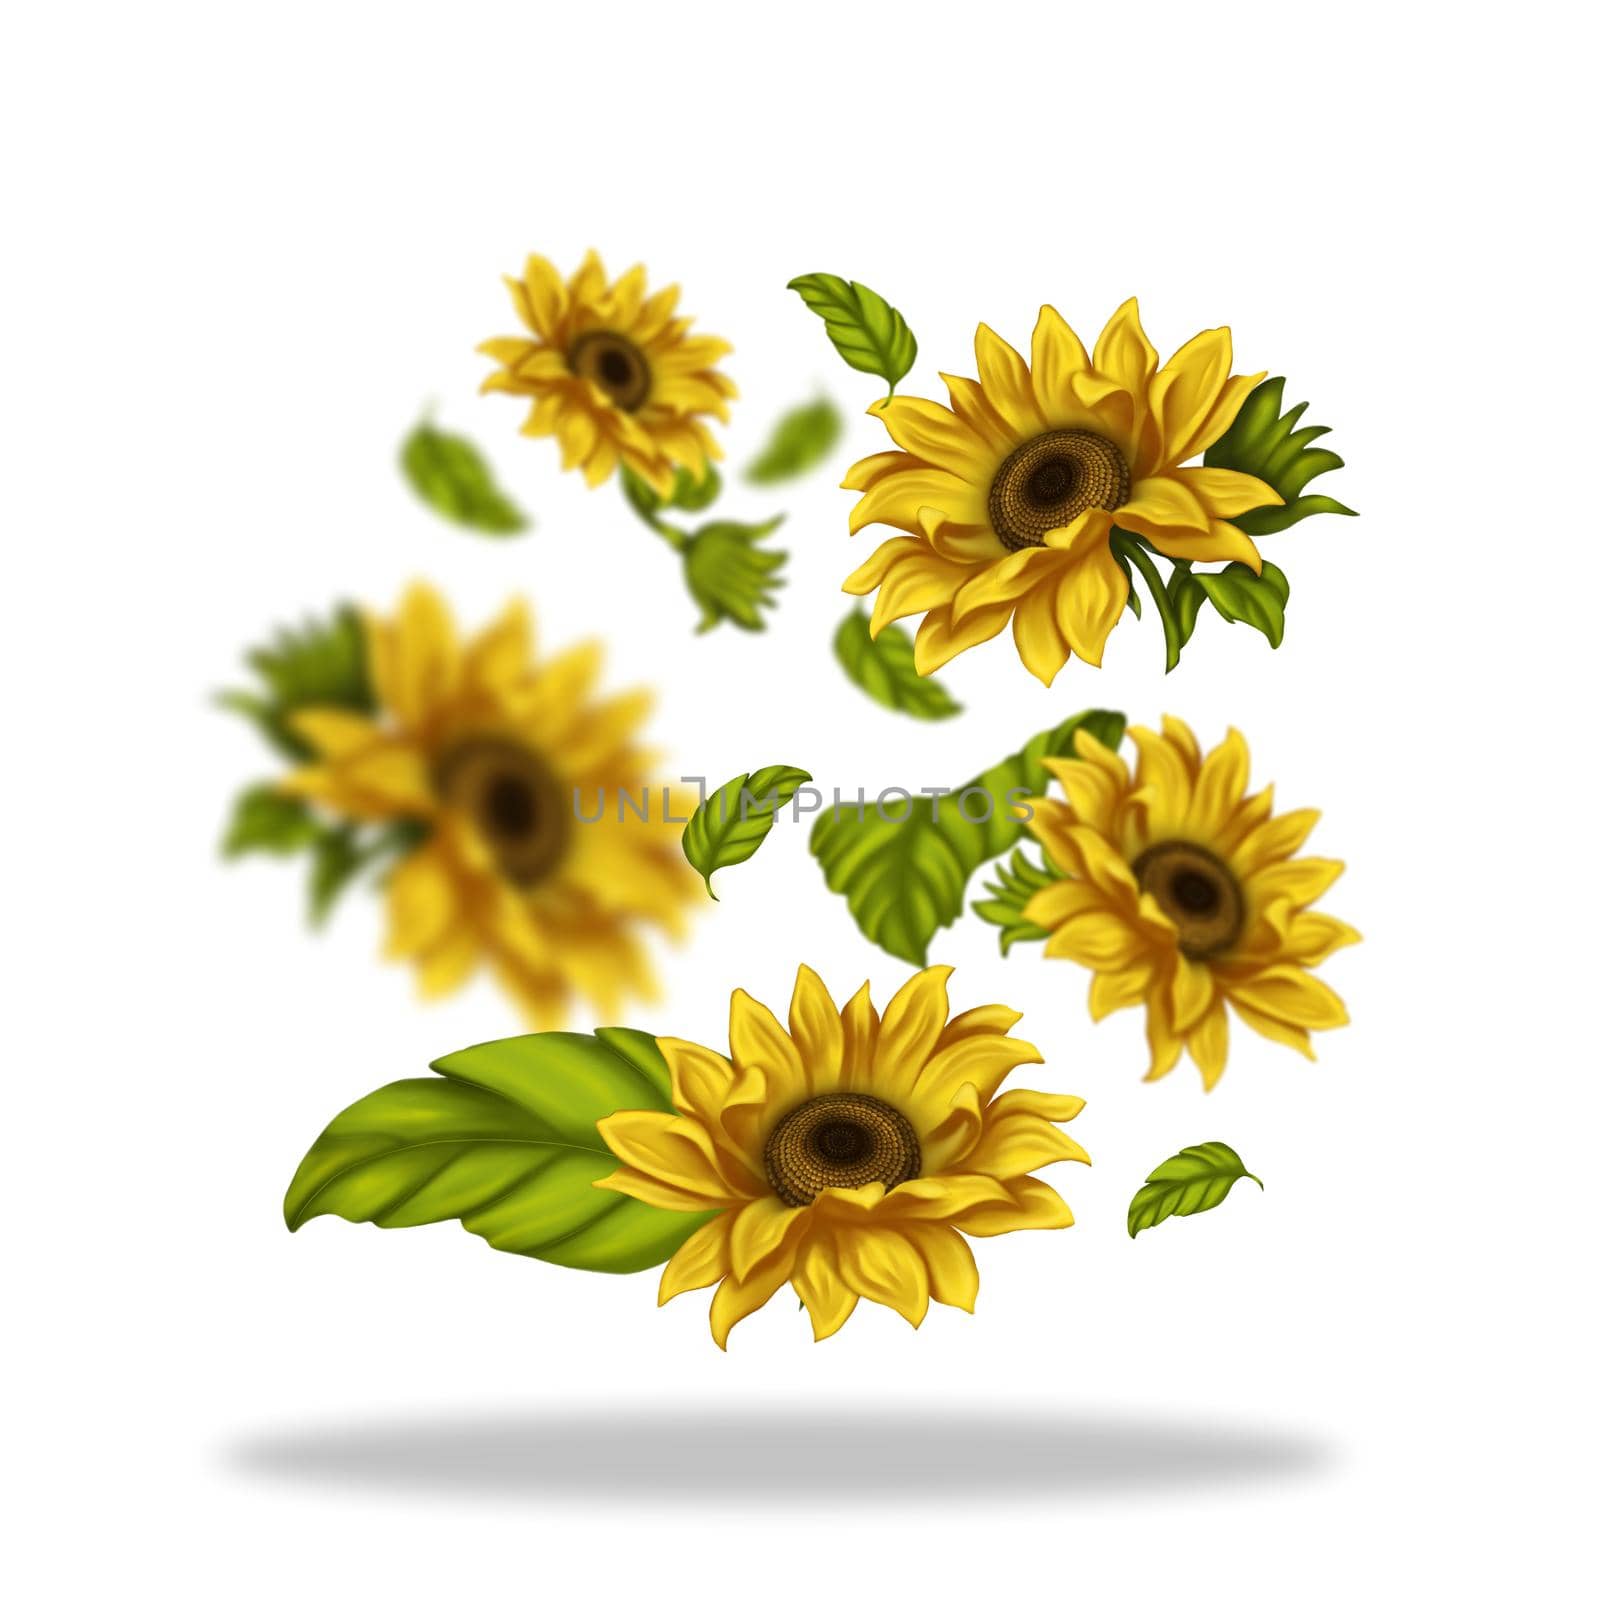 Illustration of sunflower flowers. Flowers freely levitate in space. Bright flowers on a light background.  by Alina_Lebed